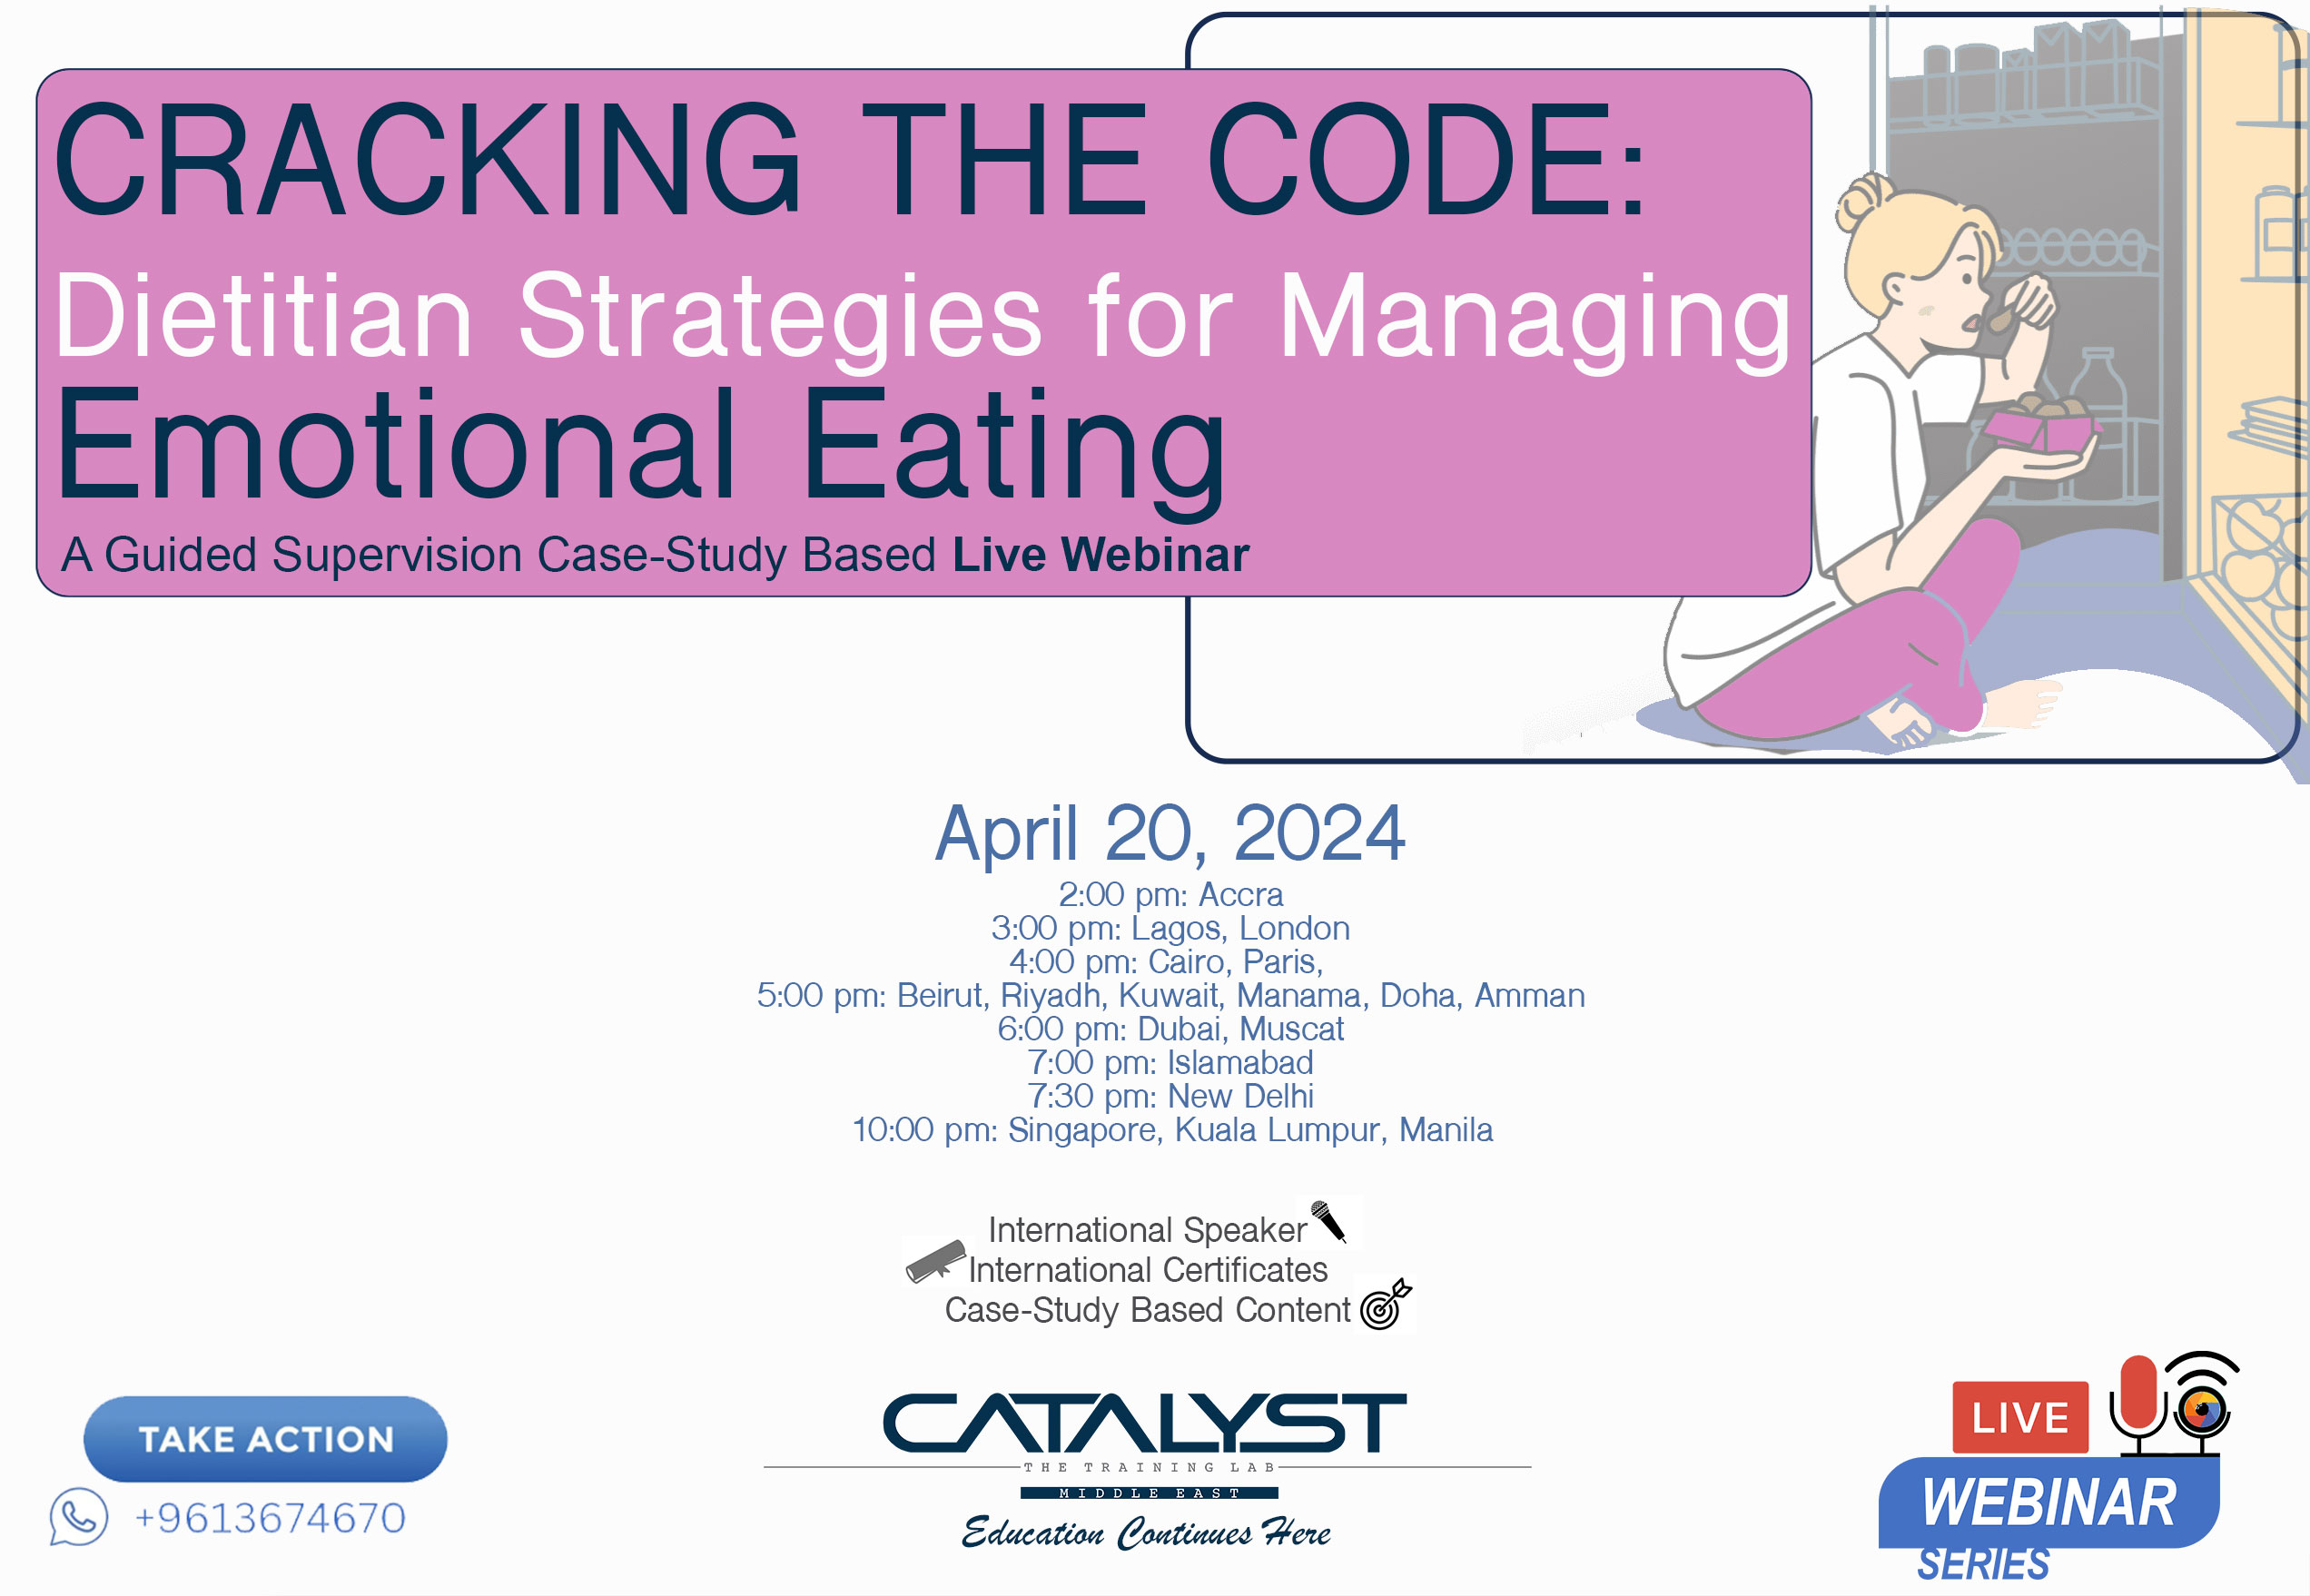 CRACKING THE CODE: Dietitian Strategies for Managing Emotional Eating 